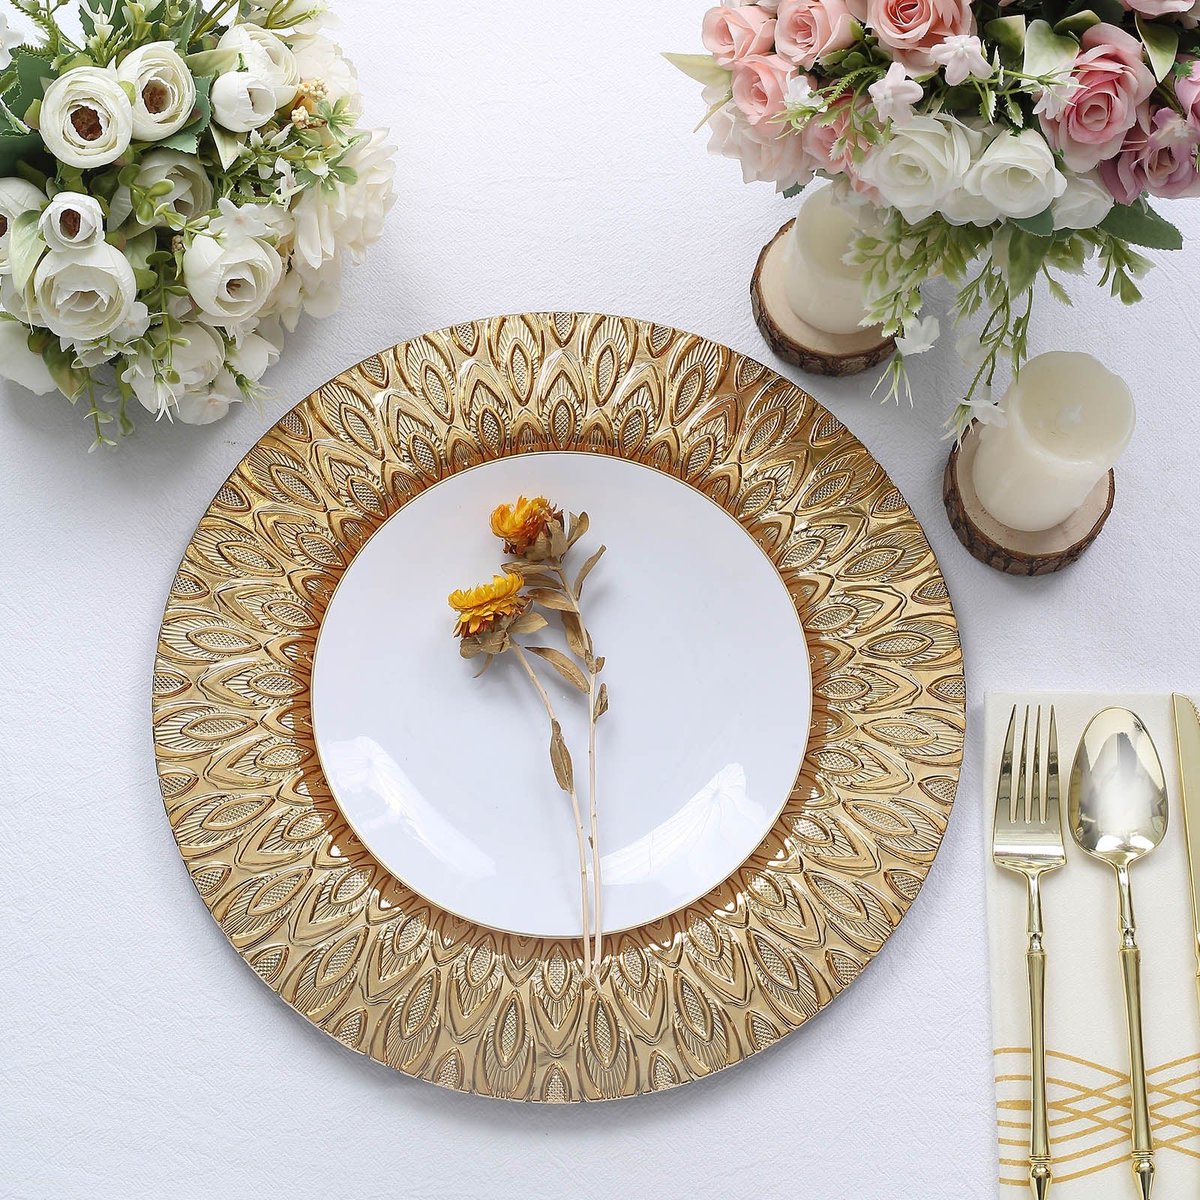 Our gorgeous #chargers are not just visually appealing, but also practical and versatile. 🍽️

➡️ Check It Out Here! - bit.ly/41ts6GC

#homedining